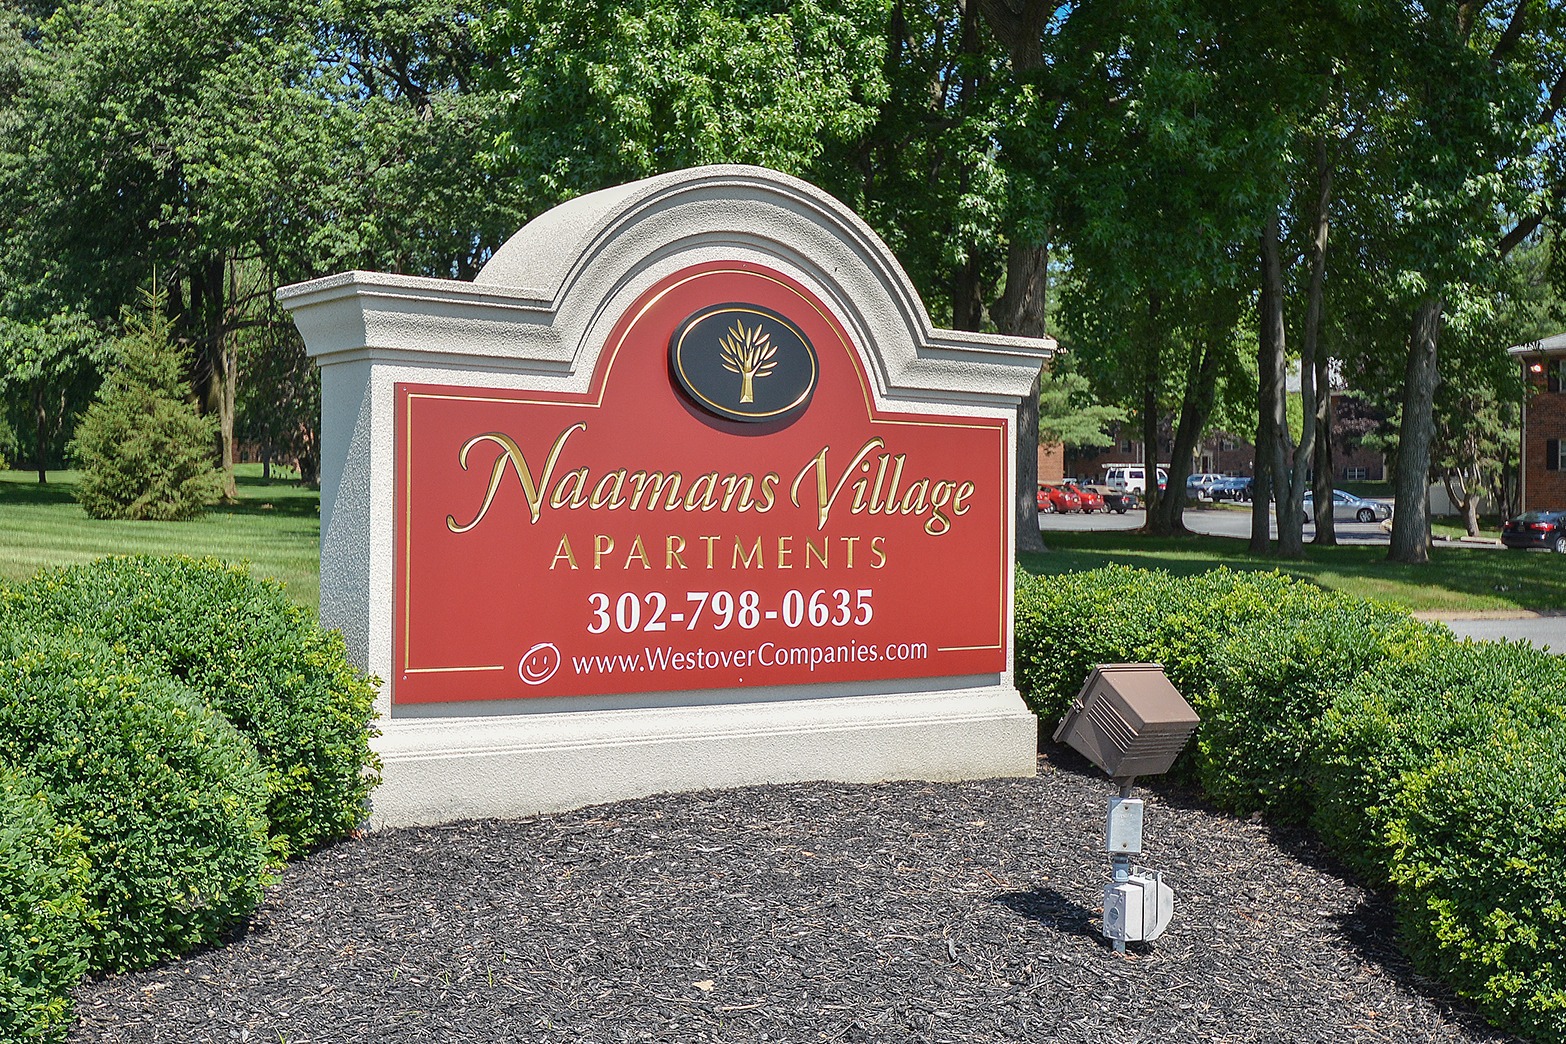 Naamans Village Apartments sign with mulch and shrubs around the sign.